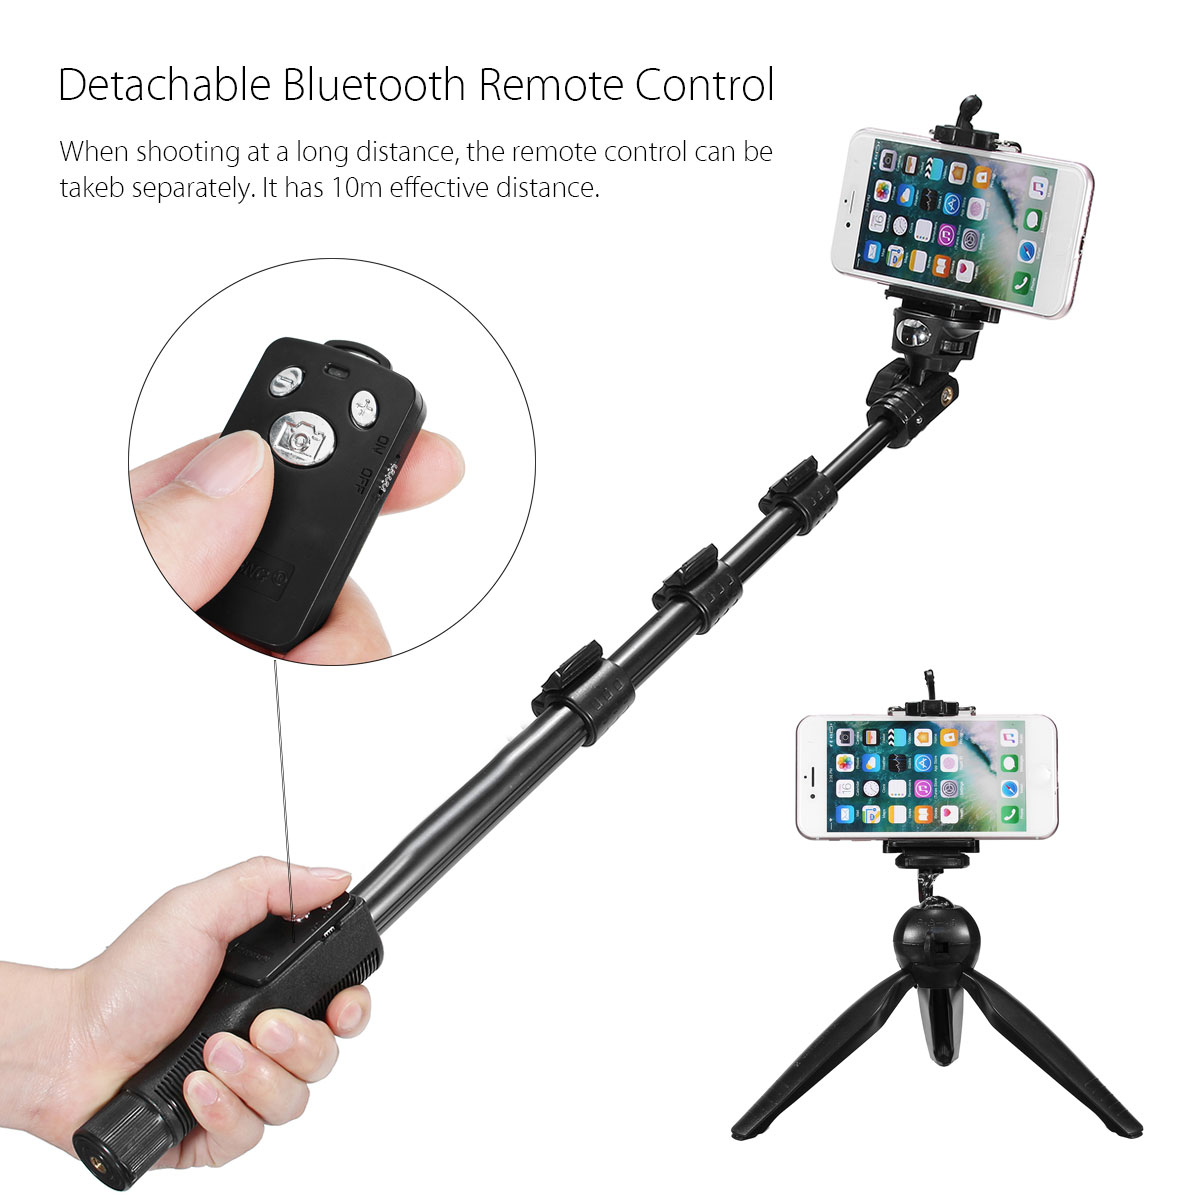 bluetooth-Wireless-Remote-Control-Extendable-Handheld-Selfie-Stick-Monopod--Tripod-for-Camera-Mobile-1340611-4